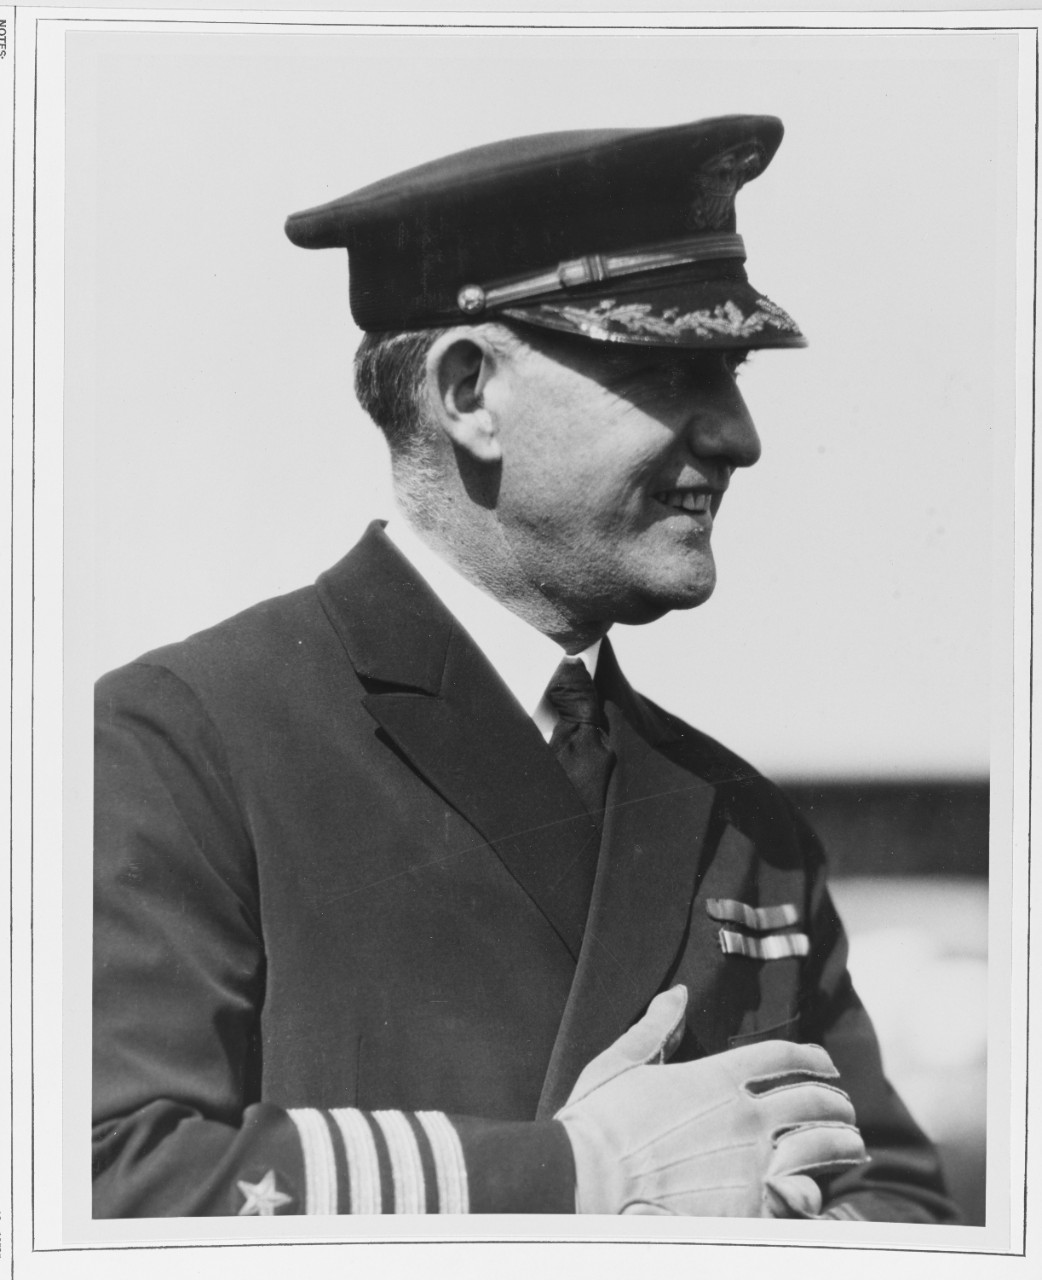 Captain Charles A. Blakely, USN (1879-1950)